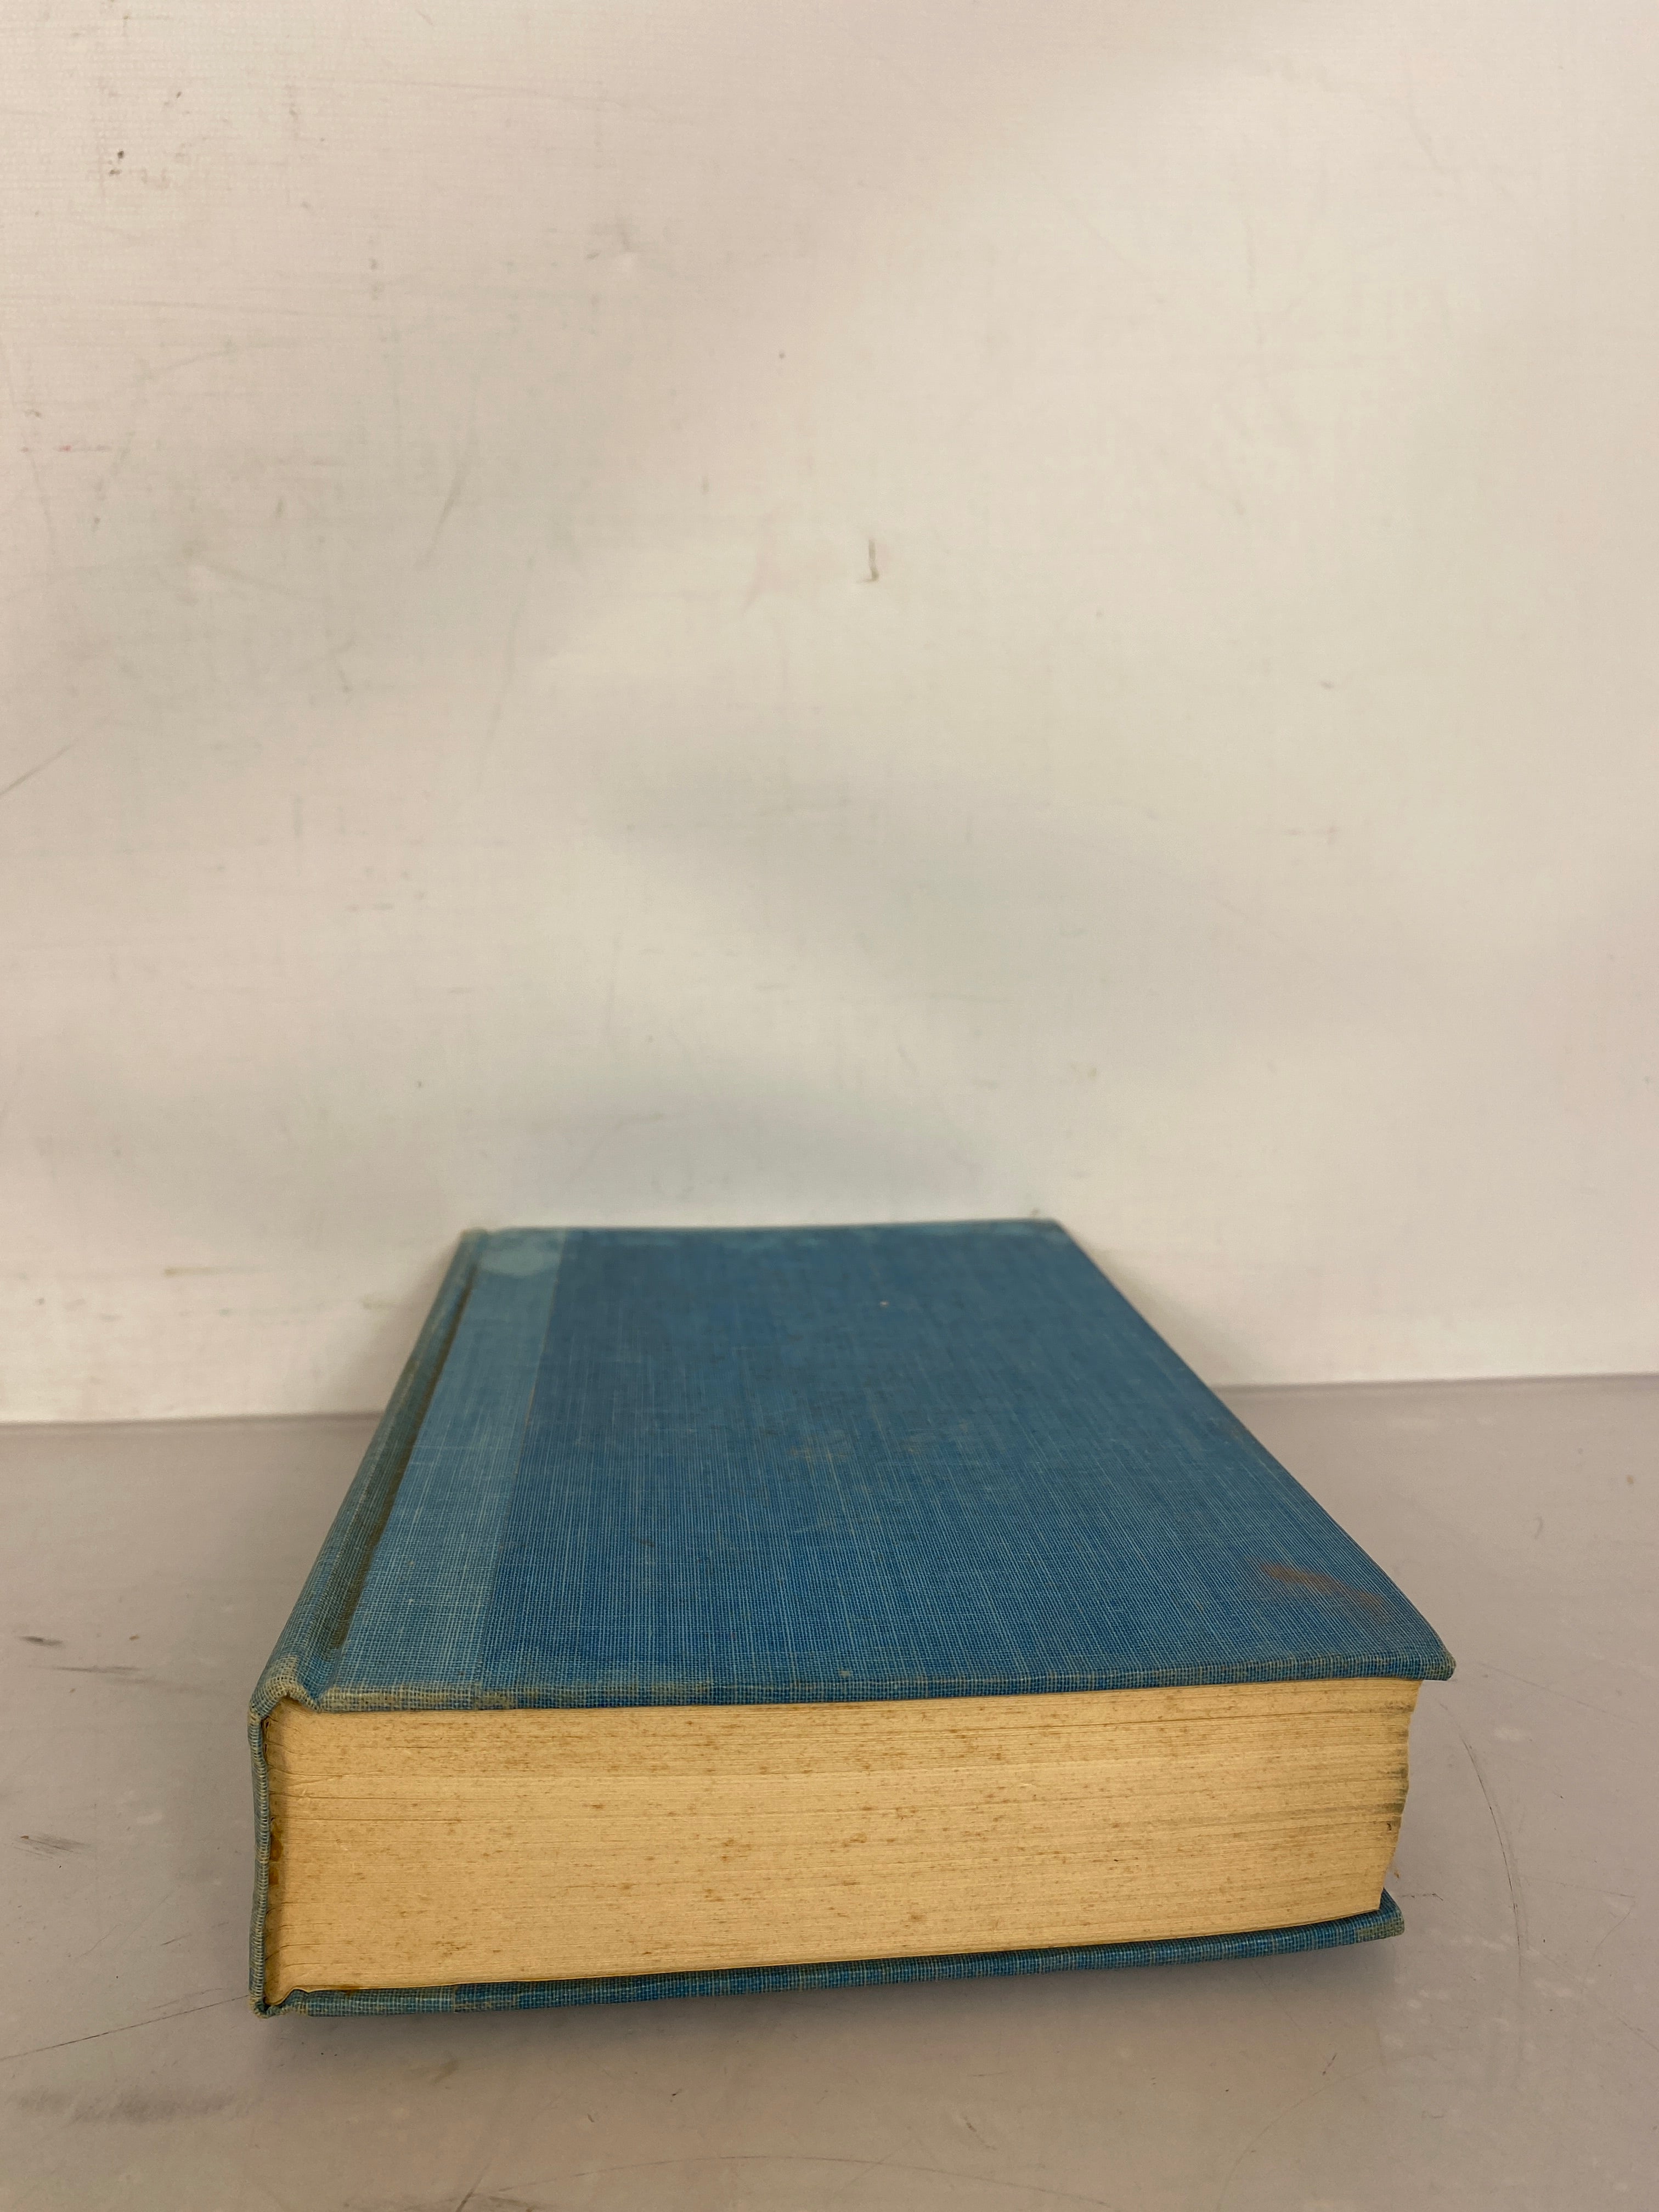 Voss by Patrick White 1957 First Edition HC Former Library Copy